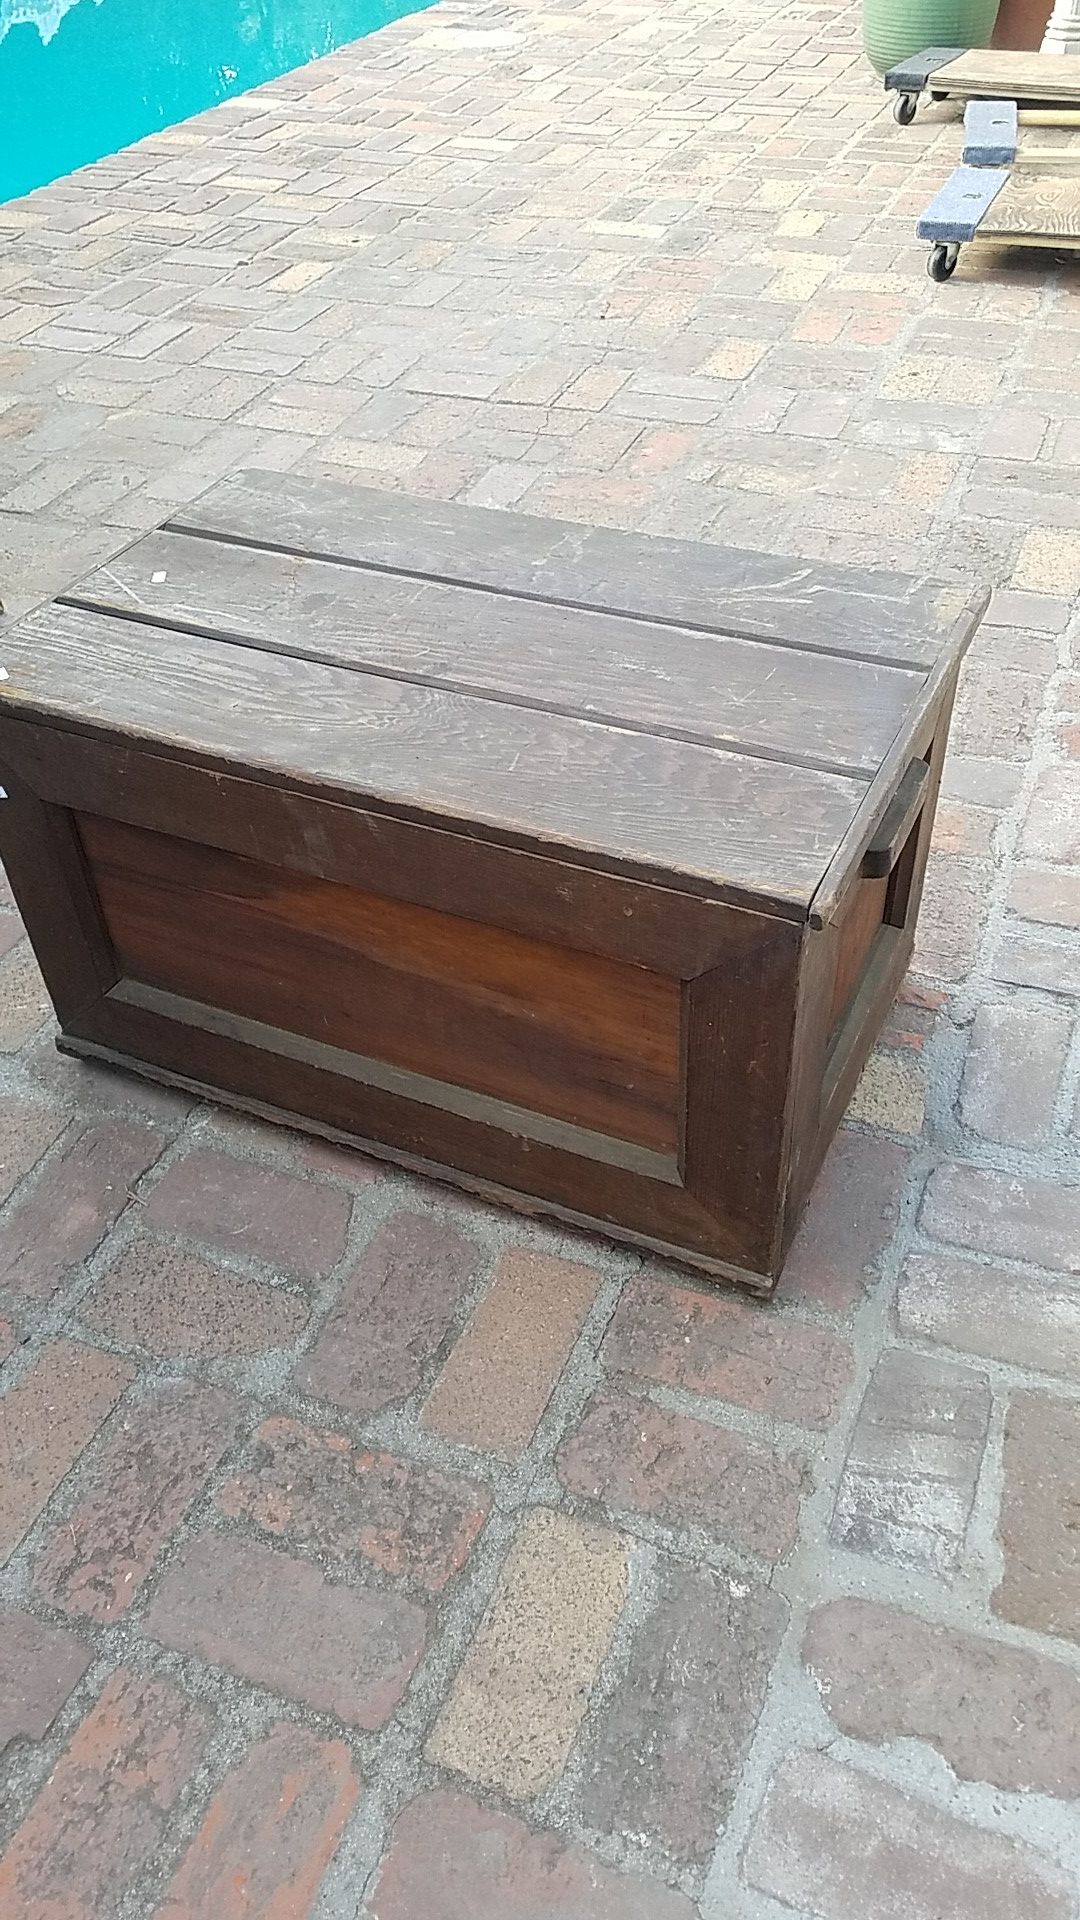 Vintage trunk or box $20 good condition I'm located in Redlands